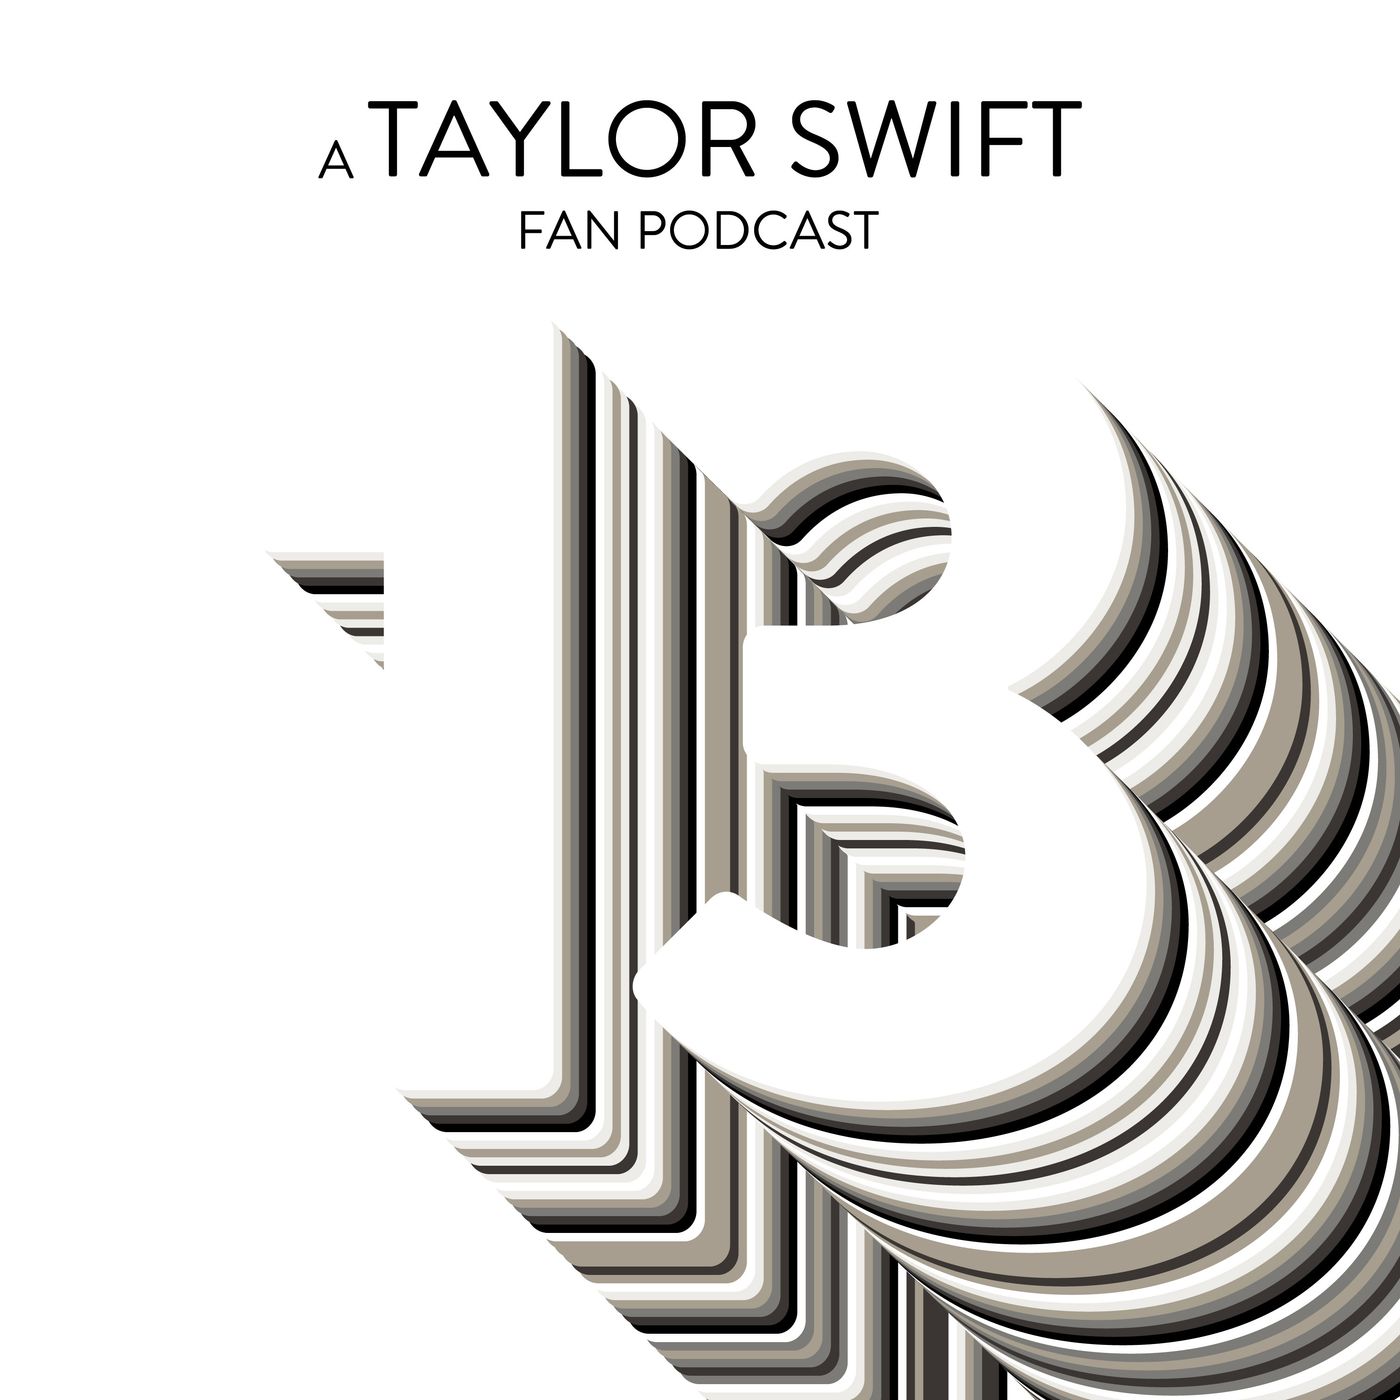 SwifTEA: Live from the Spotify Library, More TTPD QRs and Qs